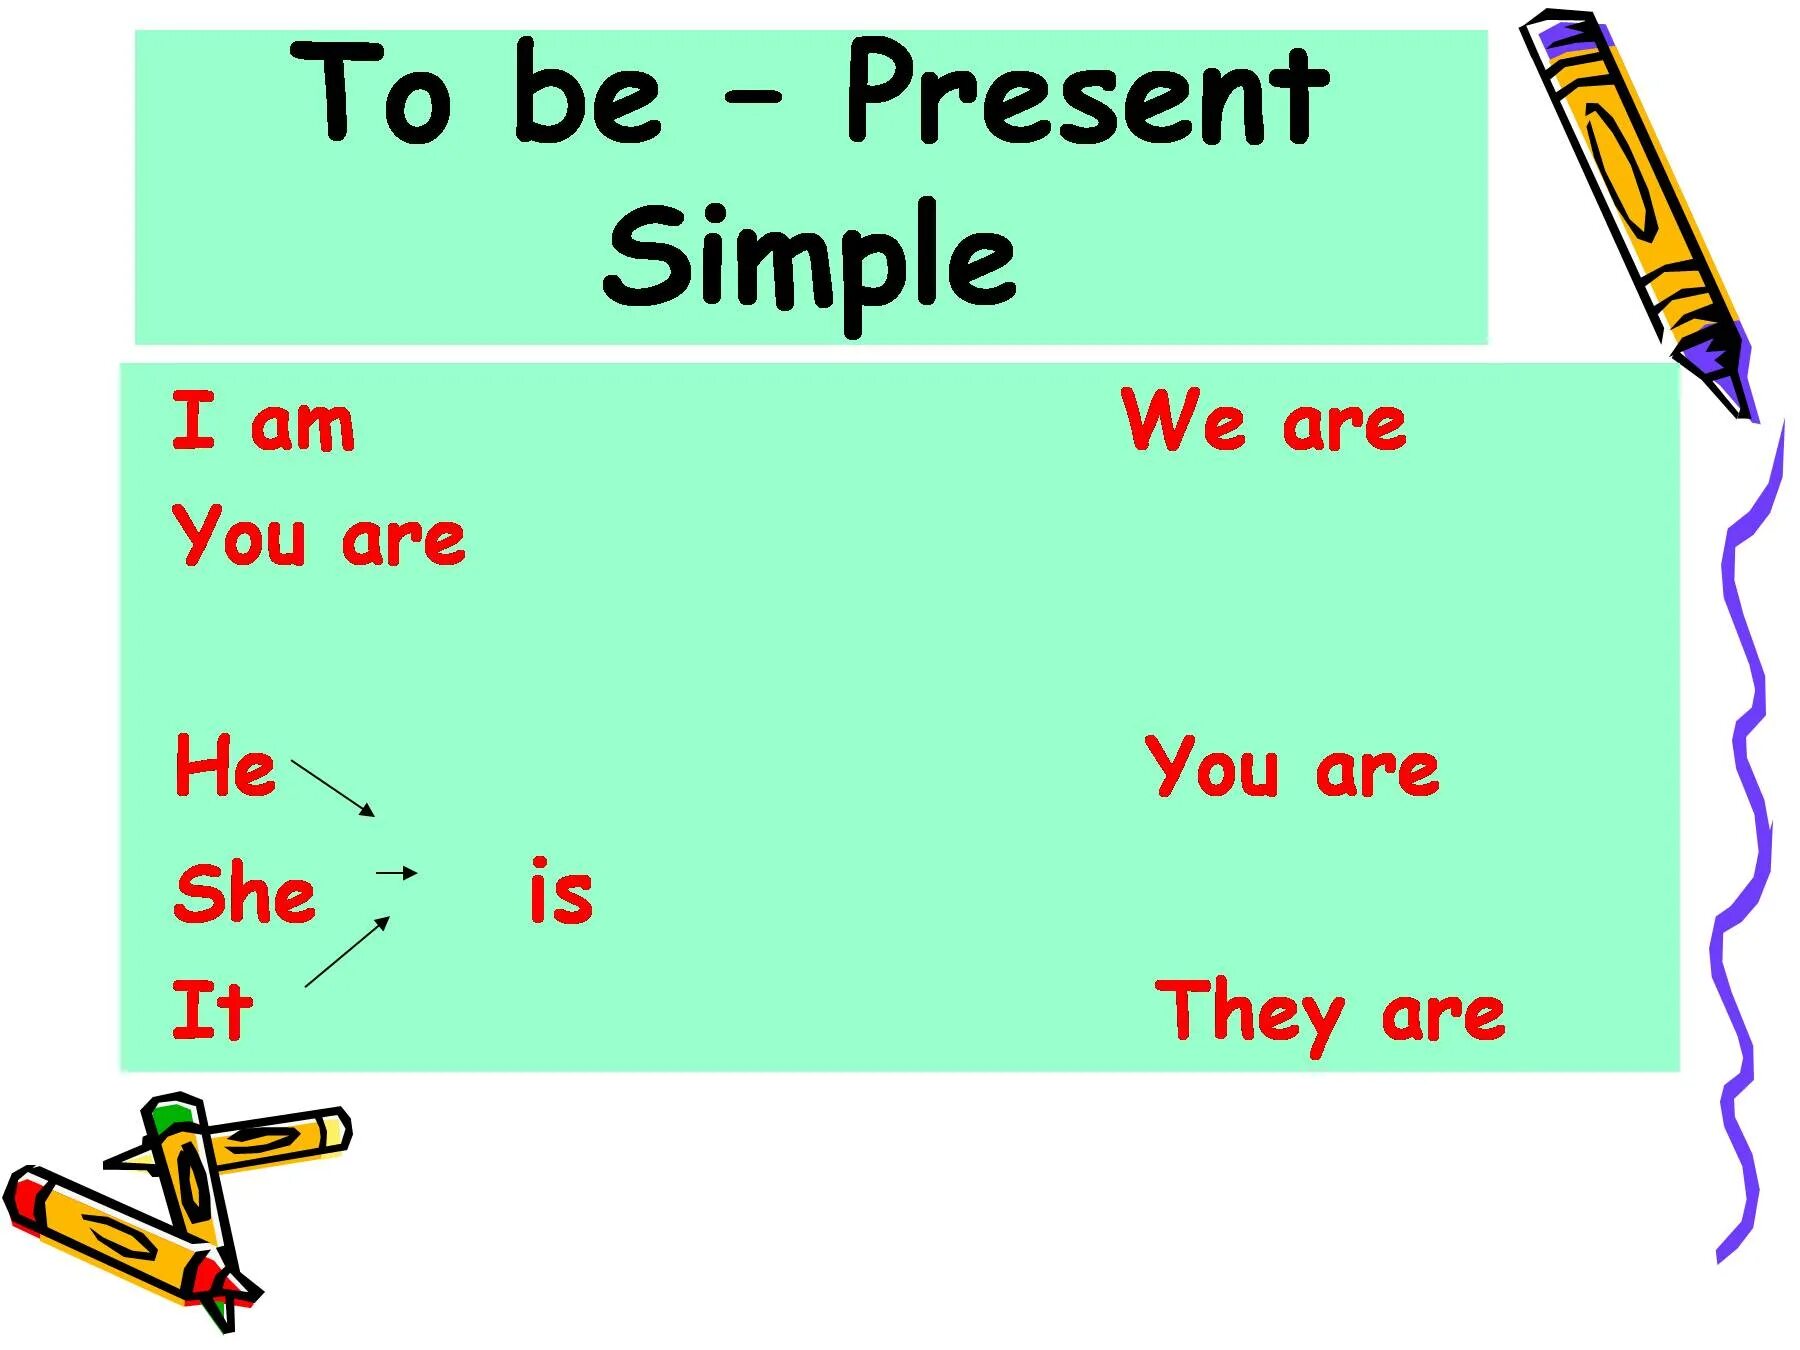 Were also present. Present simple to be правила. To be present simple. Спряжение глагола to be в present simple. Be в презент Симпл.